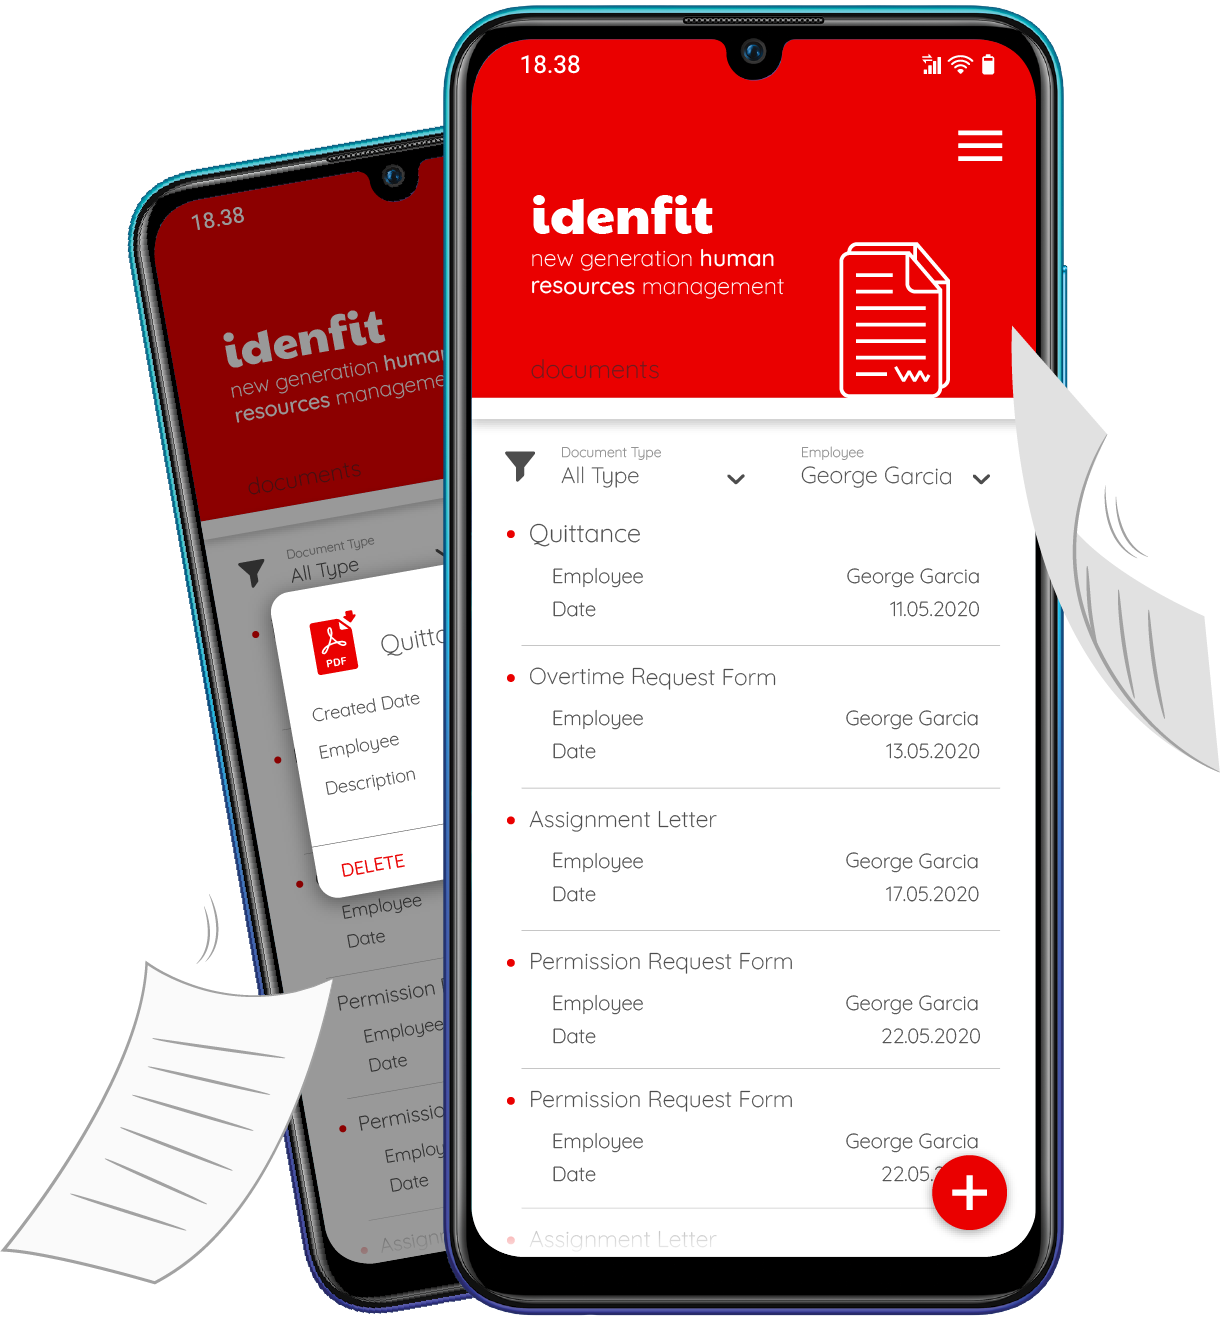 On Idenfit upload, store and share corporate documents in a quick and secure way!